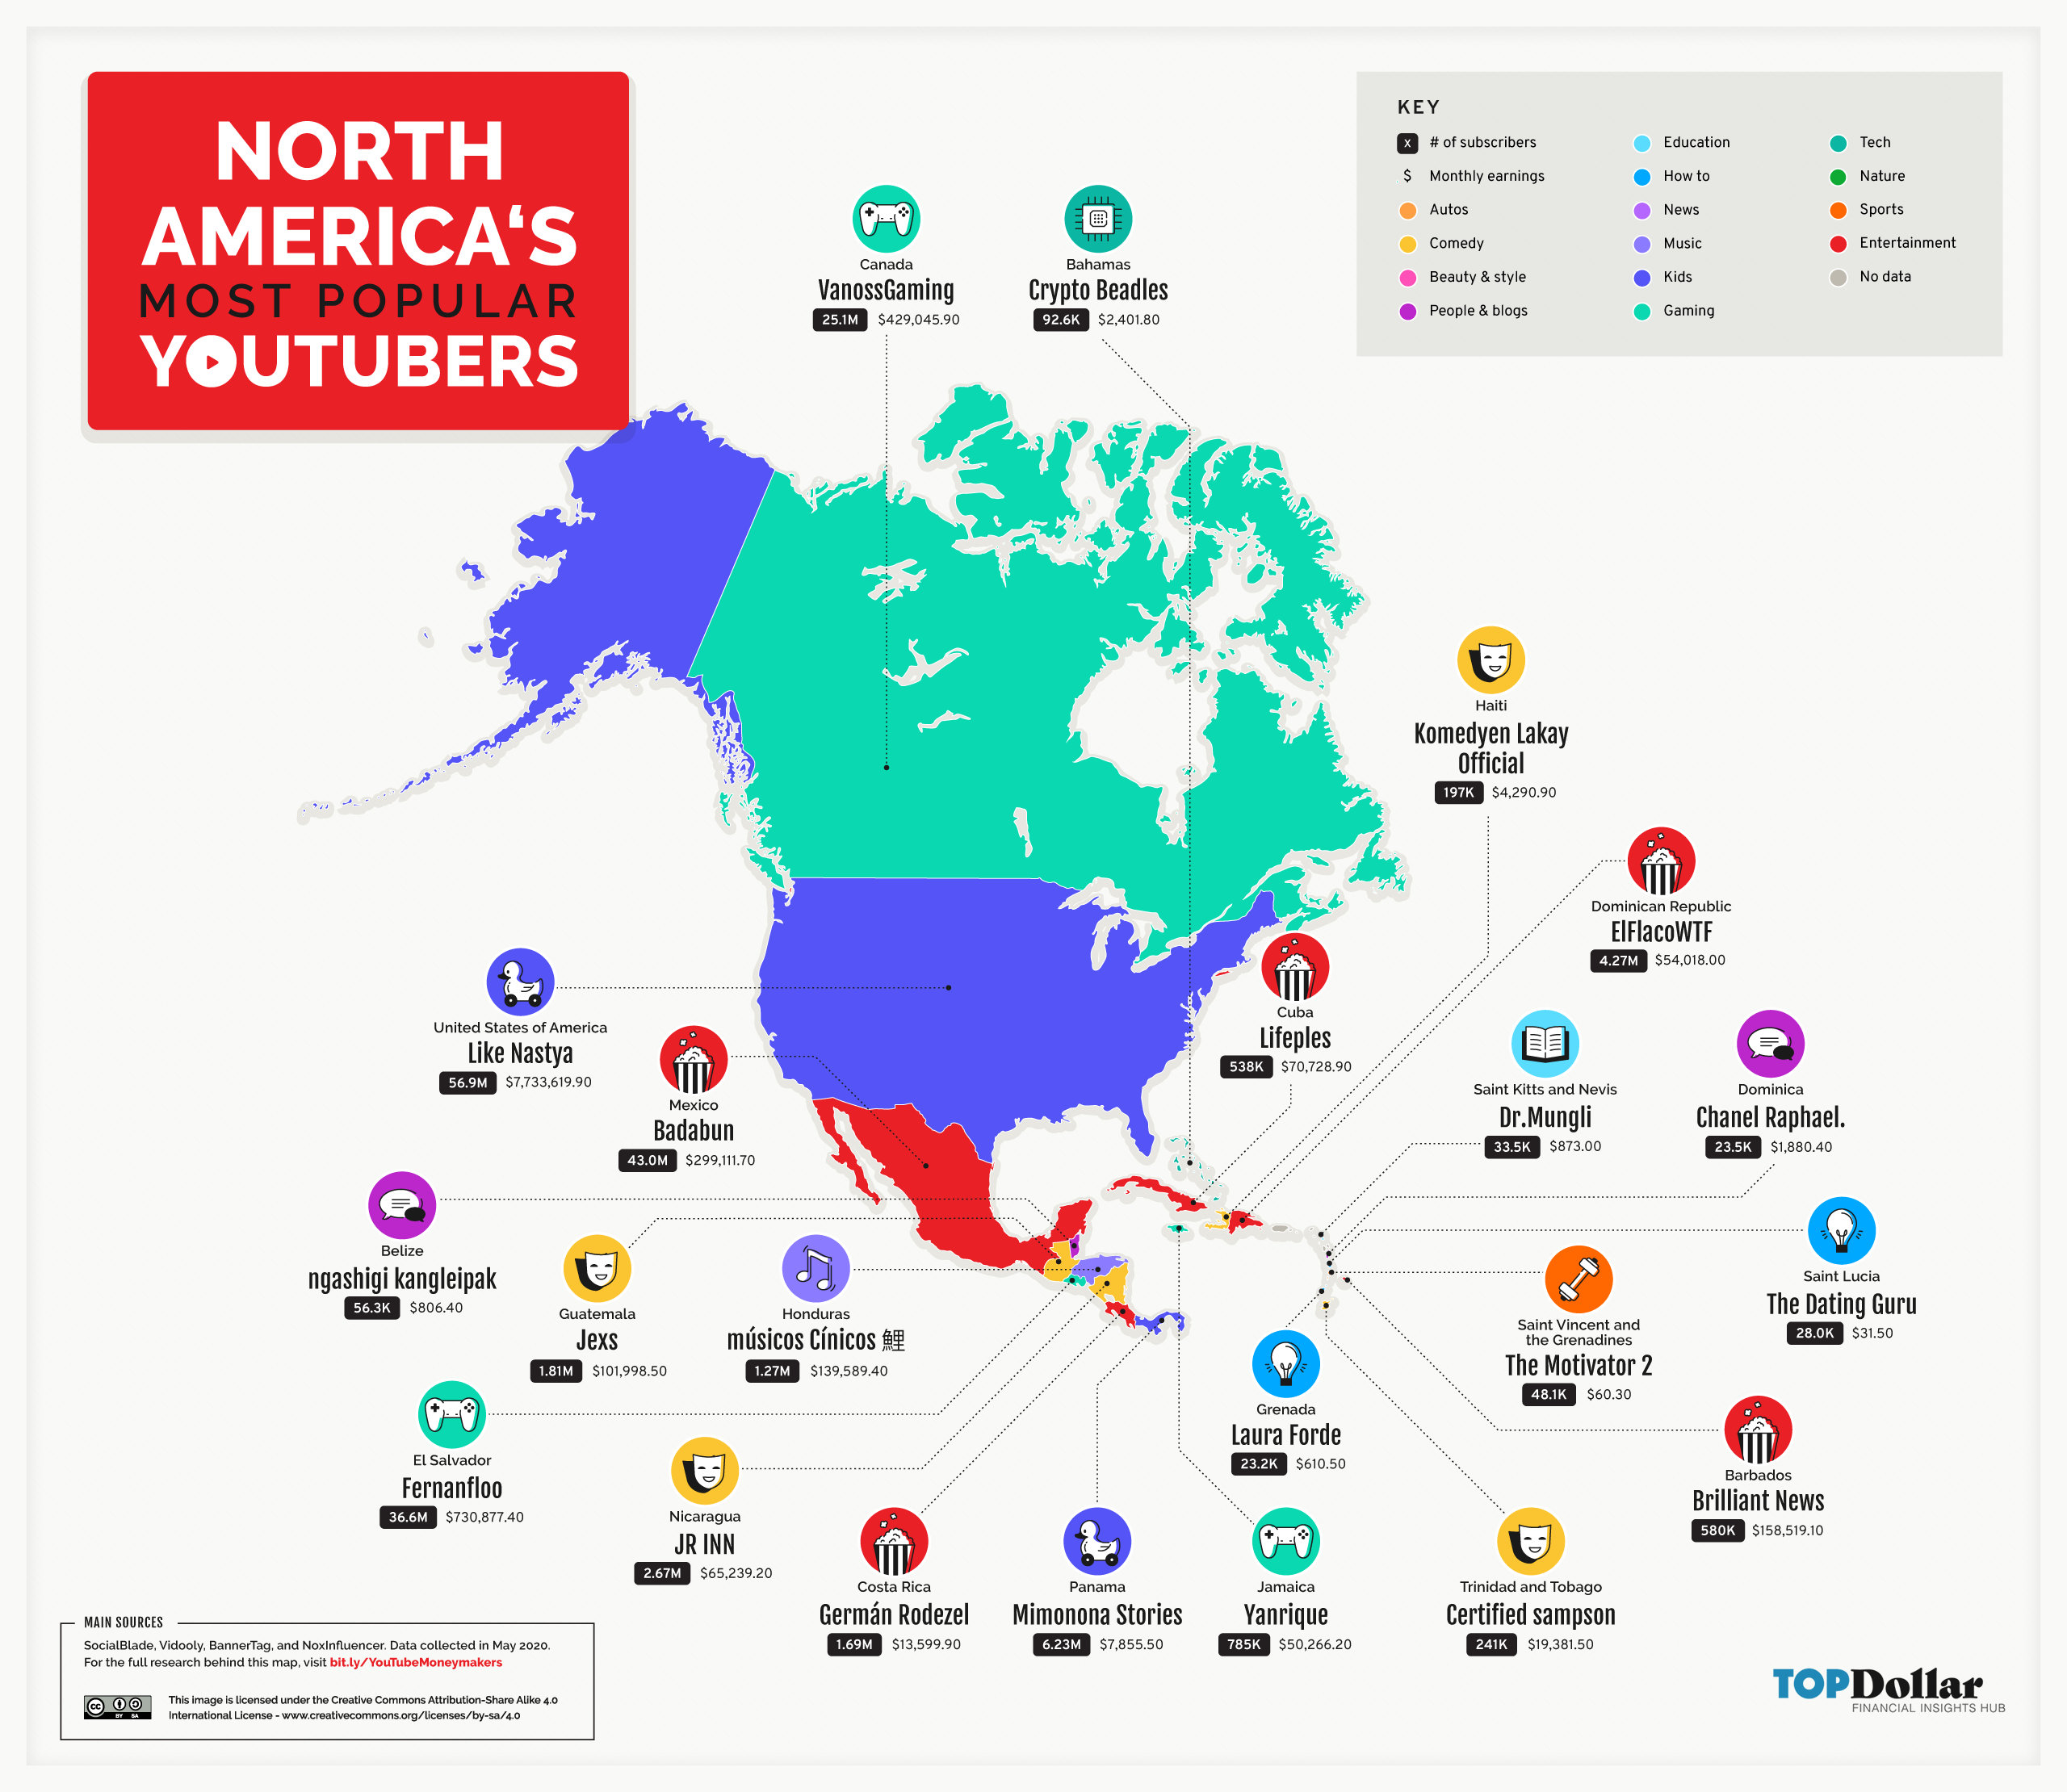 North America's Most Popular YouTubers